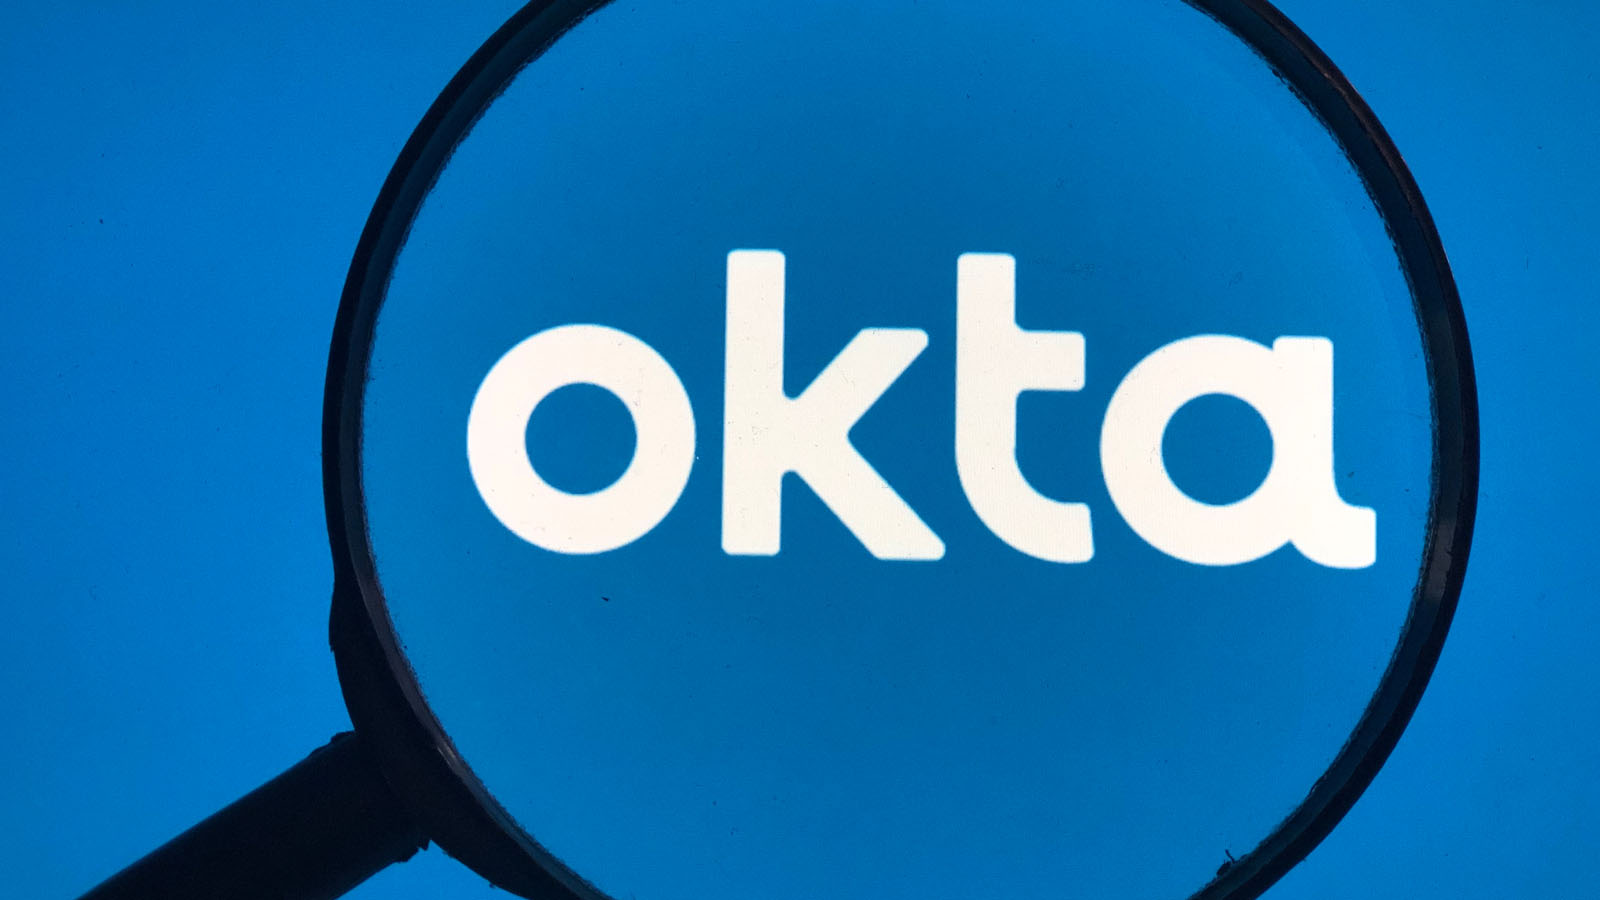 okta-announces-layoffs-of-400-employees-citing-long-term-growth-strategy